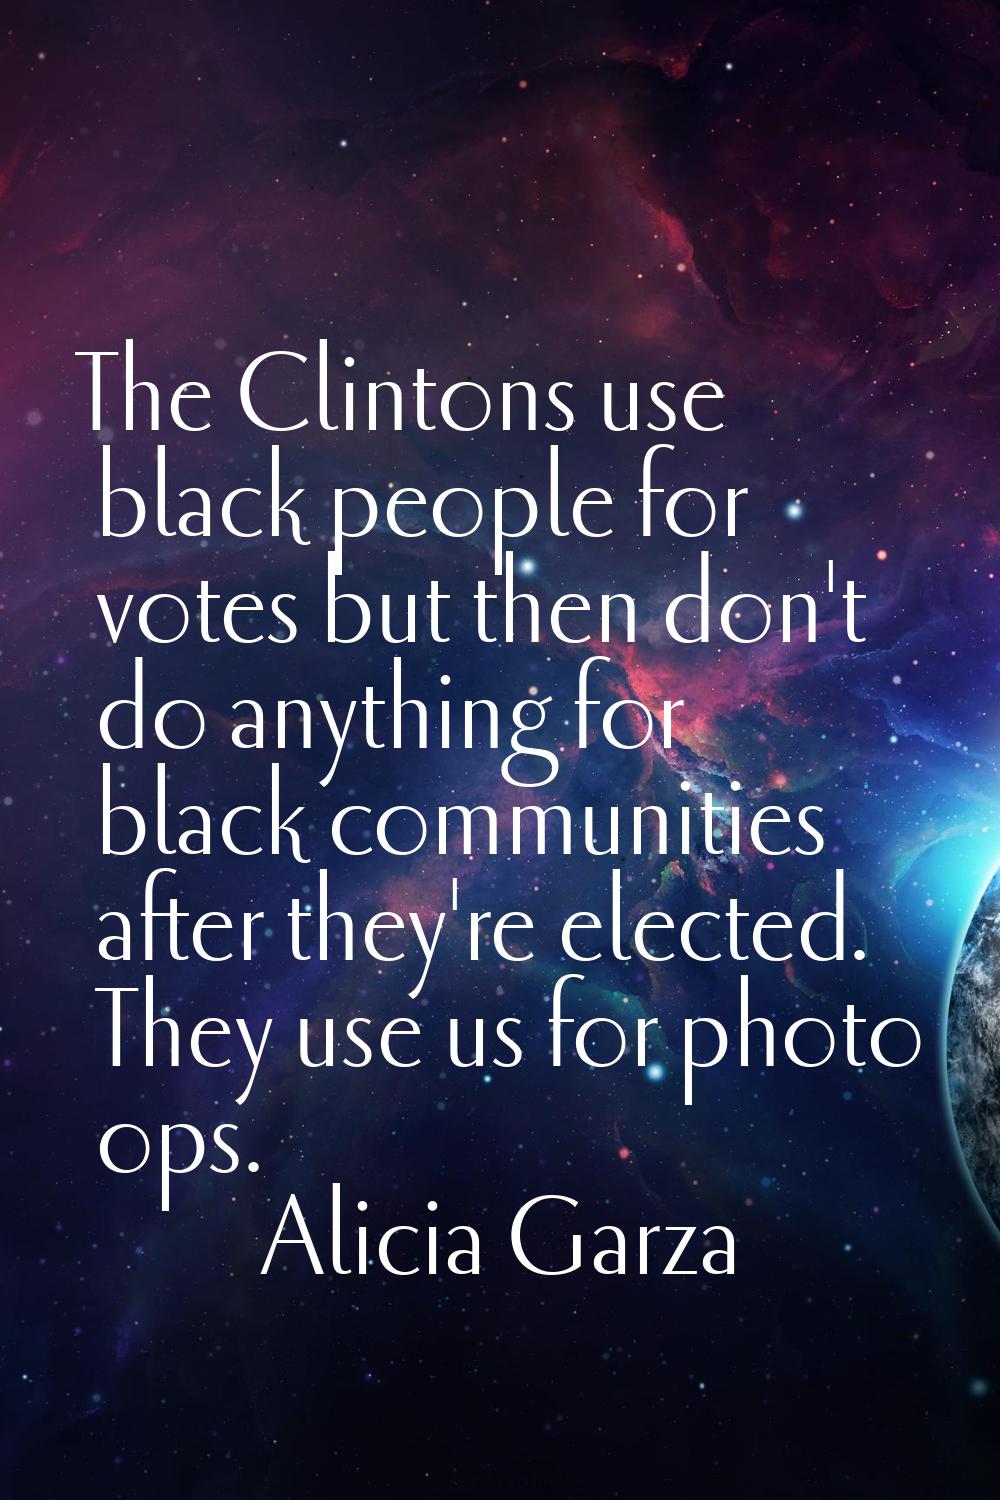 The Clintons use black people for votes but then don't do anything for black communities after they